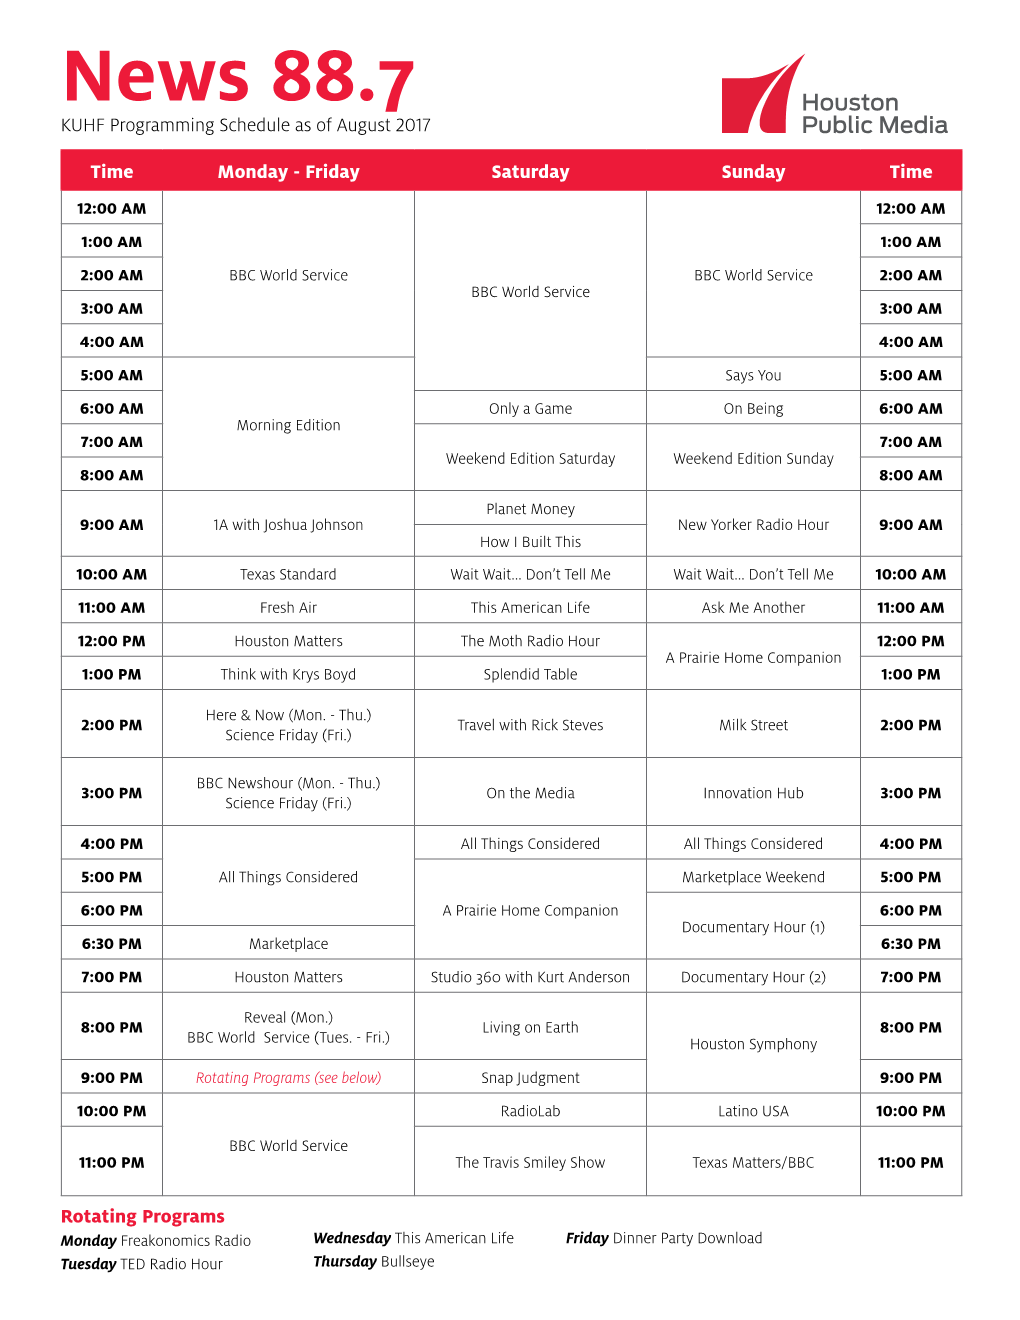 News 88.7 KUHF Programming Schedule As of August 2017